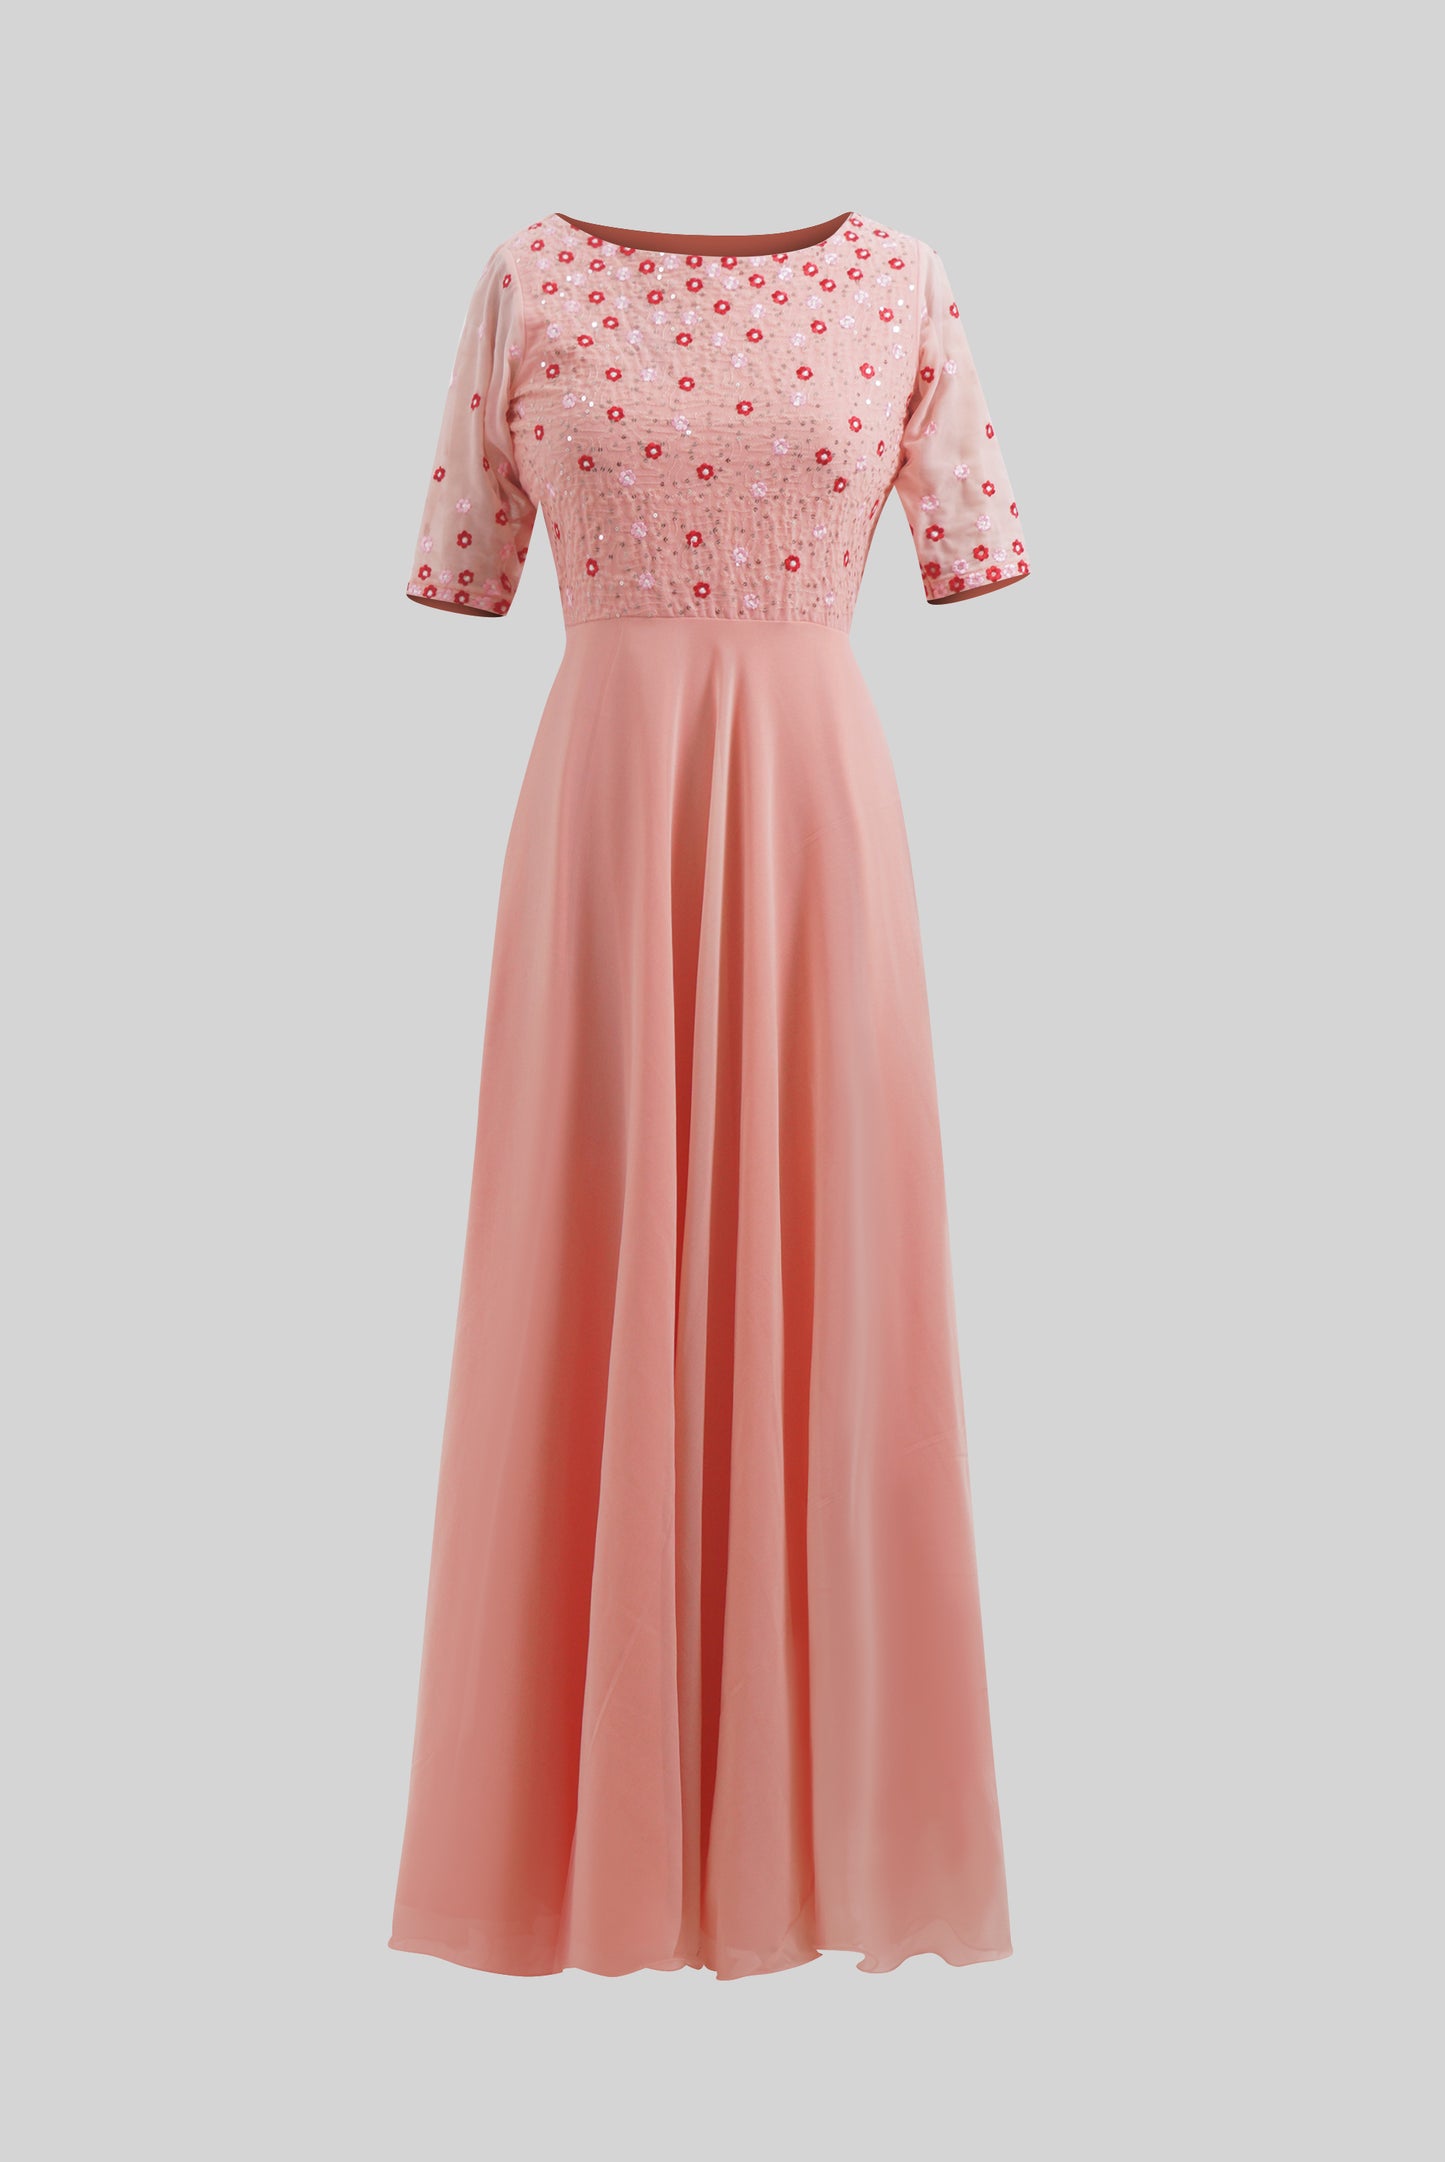 ZIA238 Pink Embroidered Full Length Gown